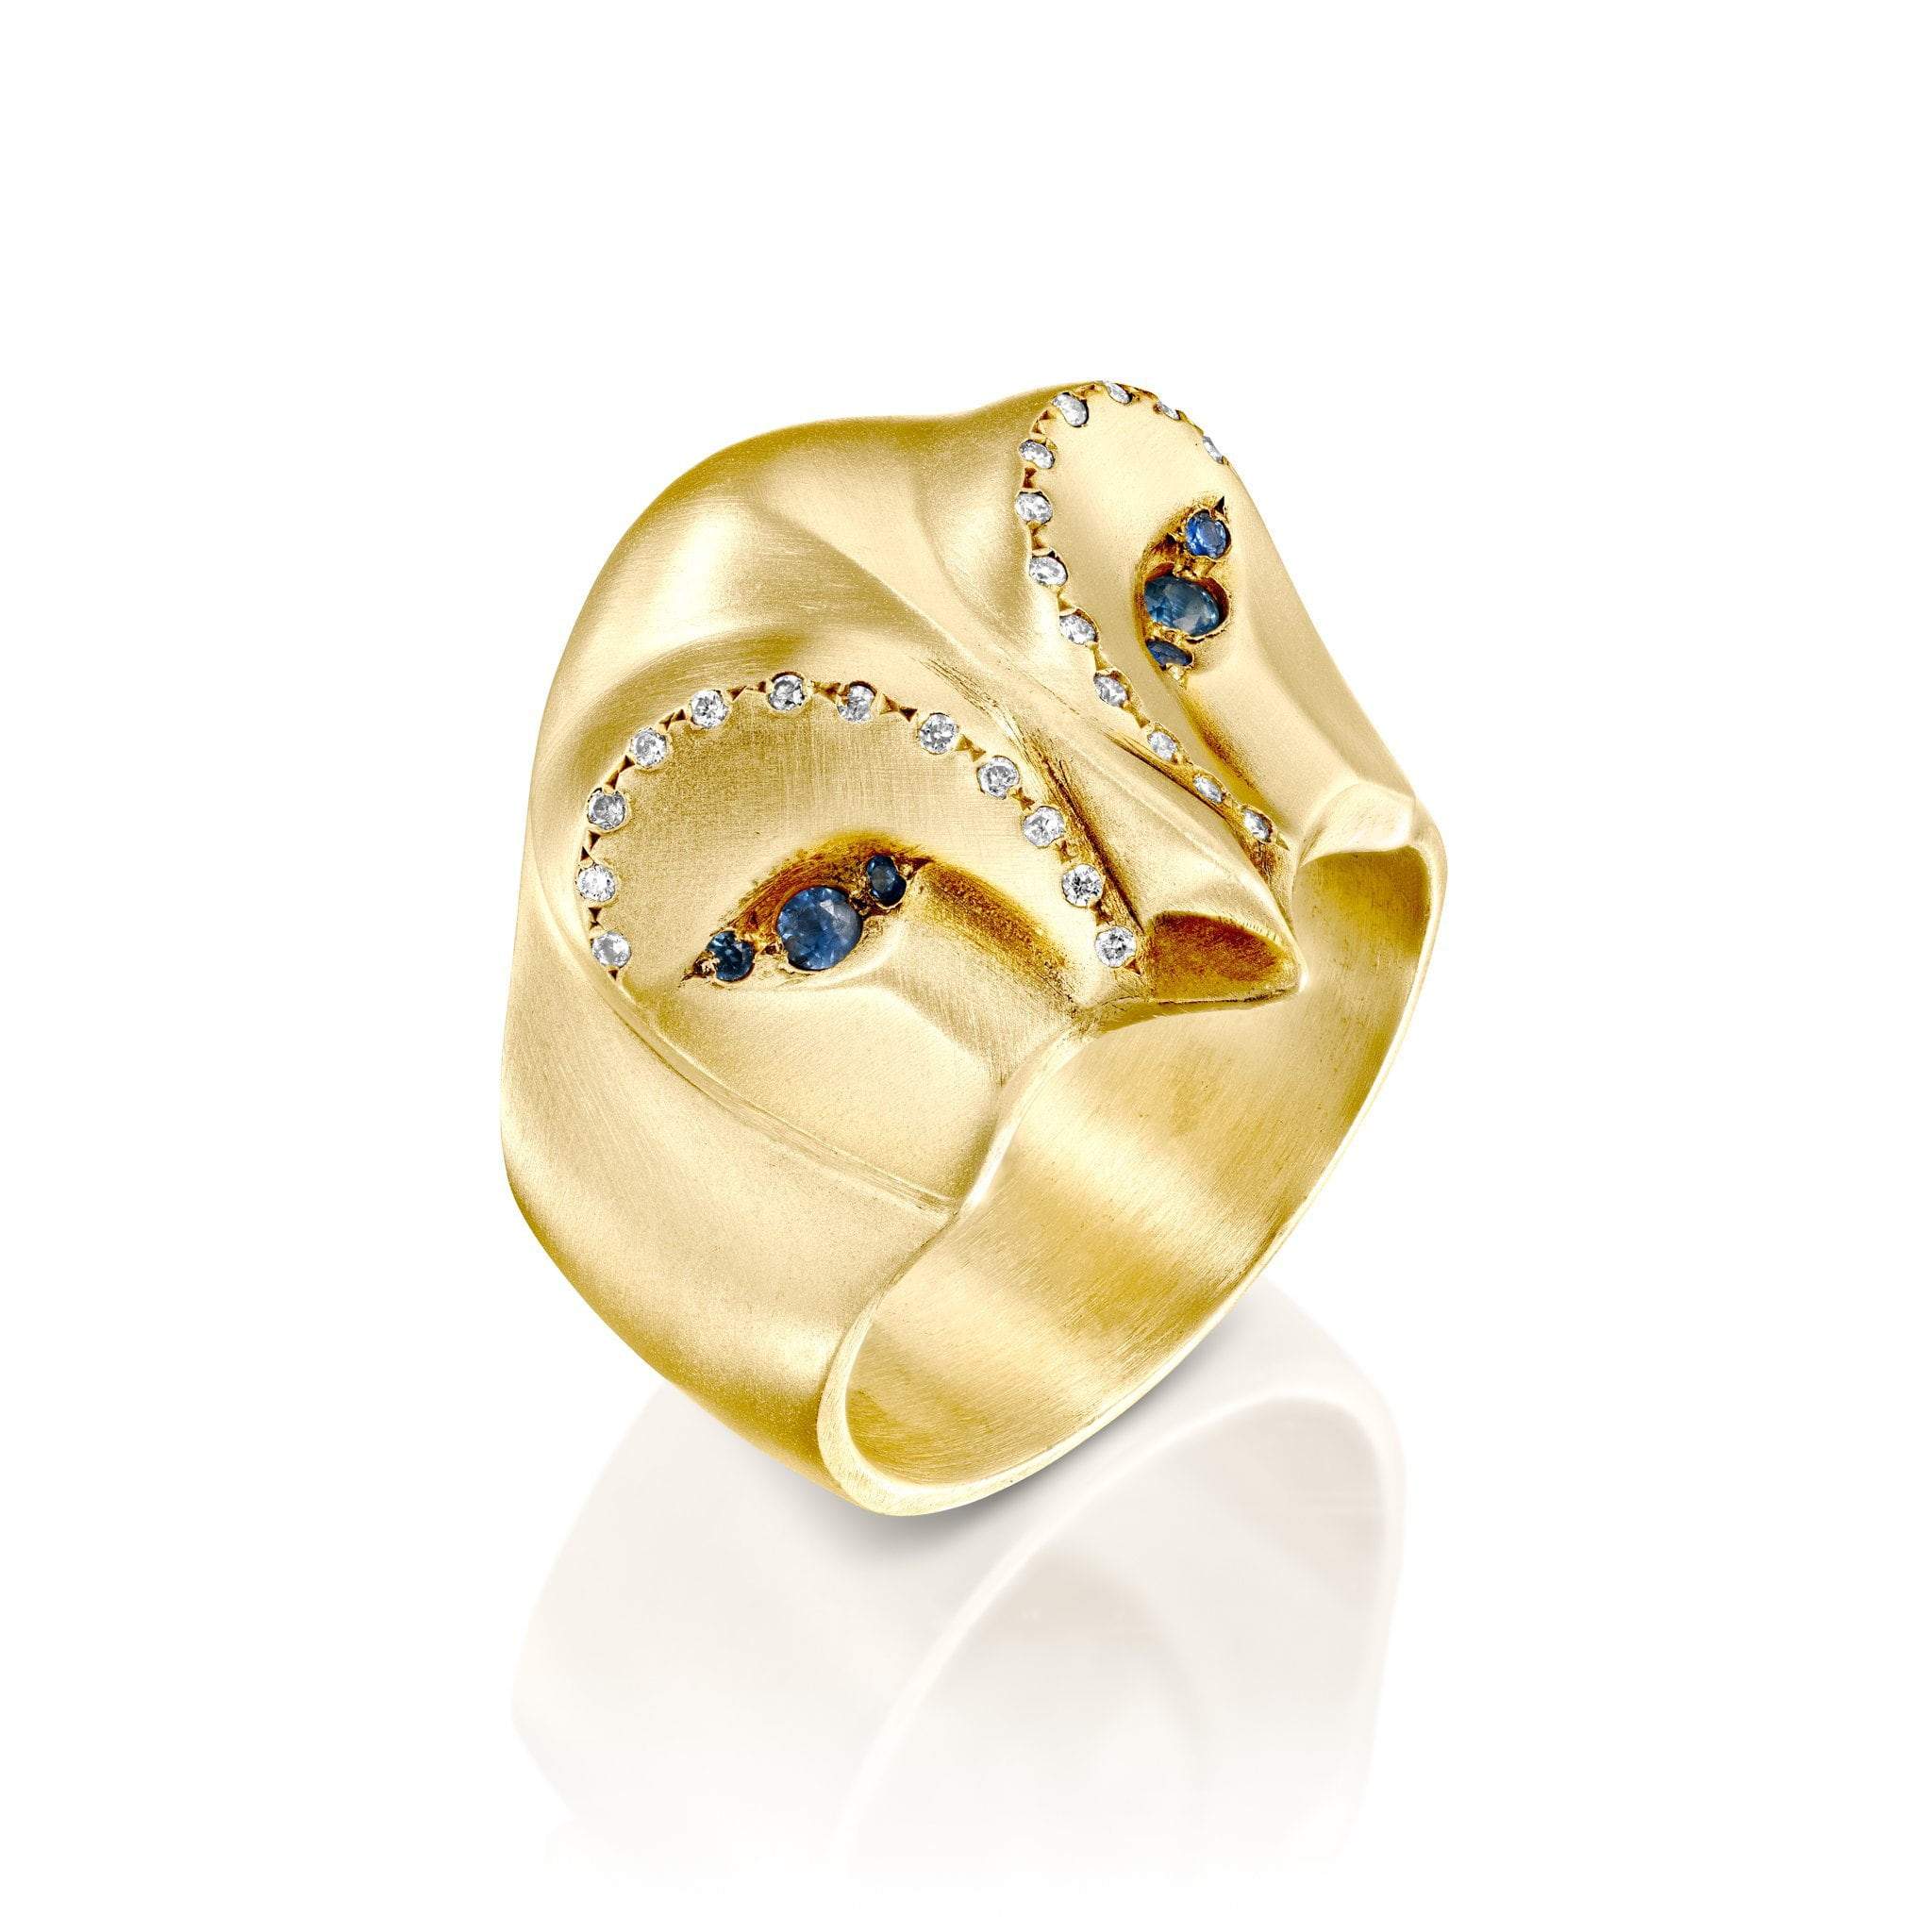 ELINA GLEIZER Gold Snowy Owl Ring with Blue Sapphires and White Diamonds